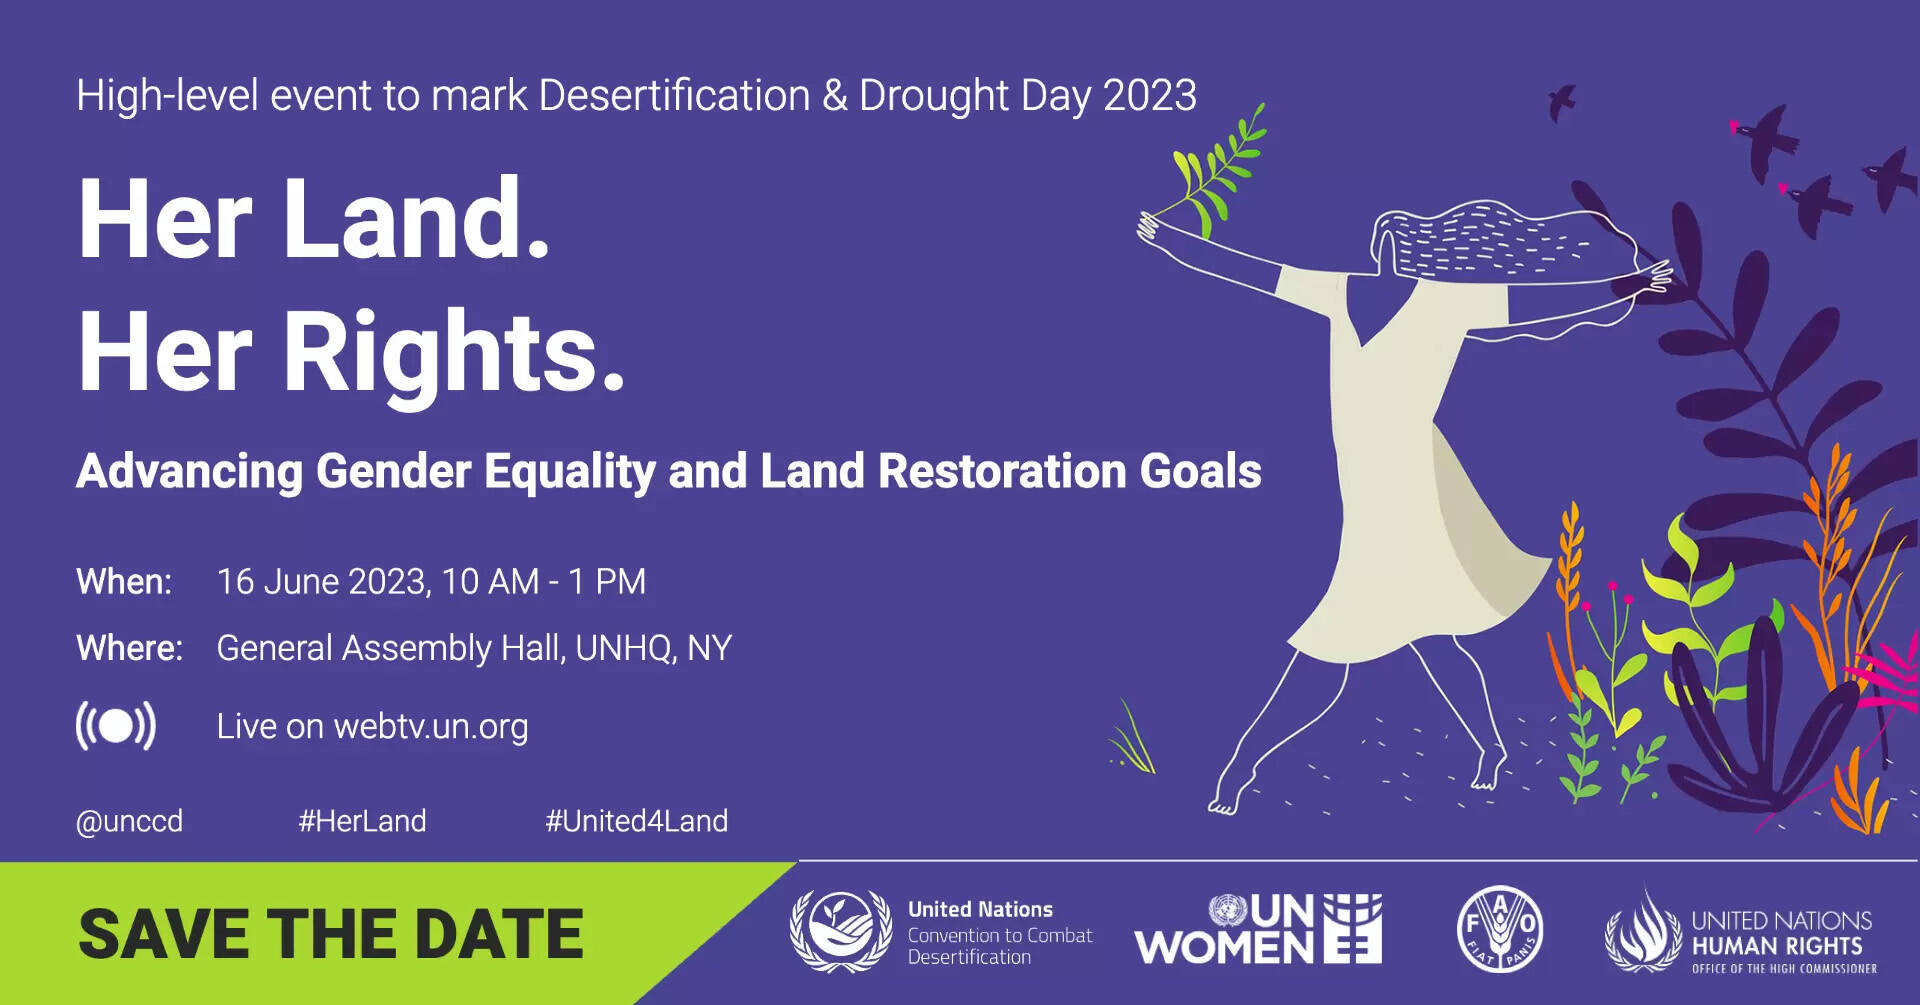 UN High Level Event to Mark Desertification & Drought Day